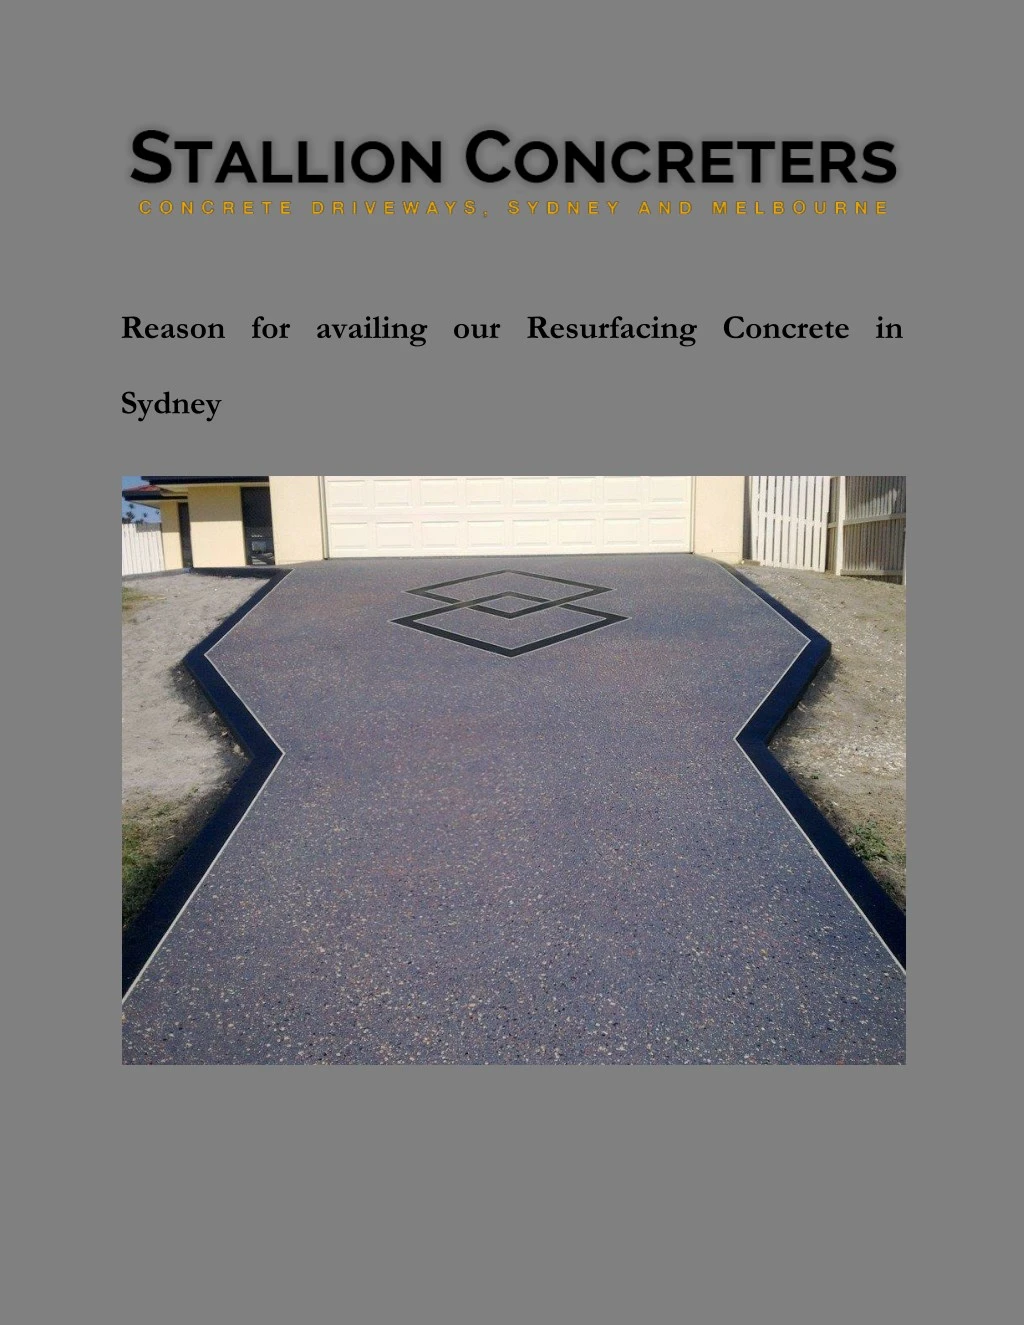 reason for availing our resurfacing concrete in